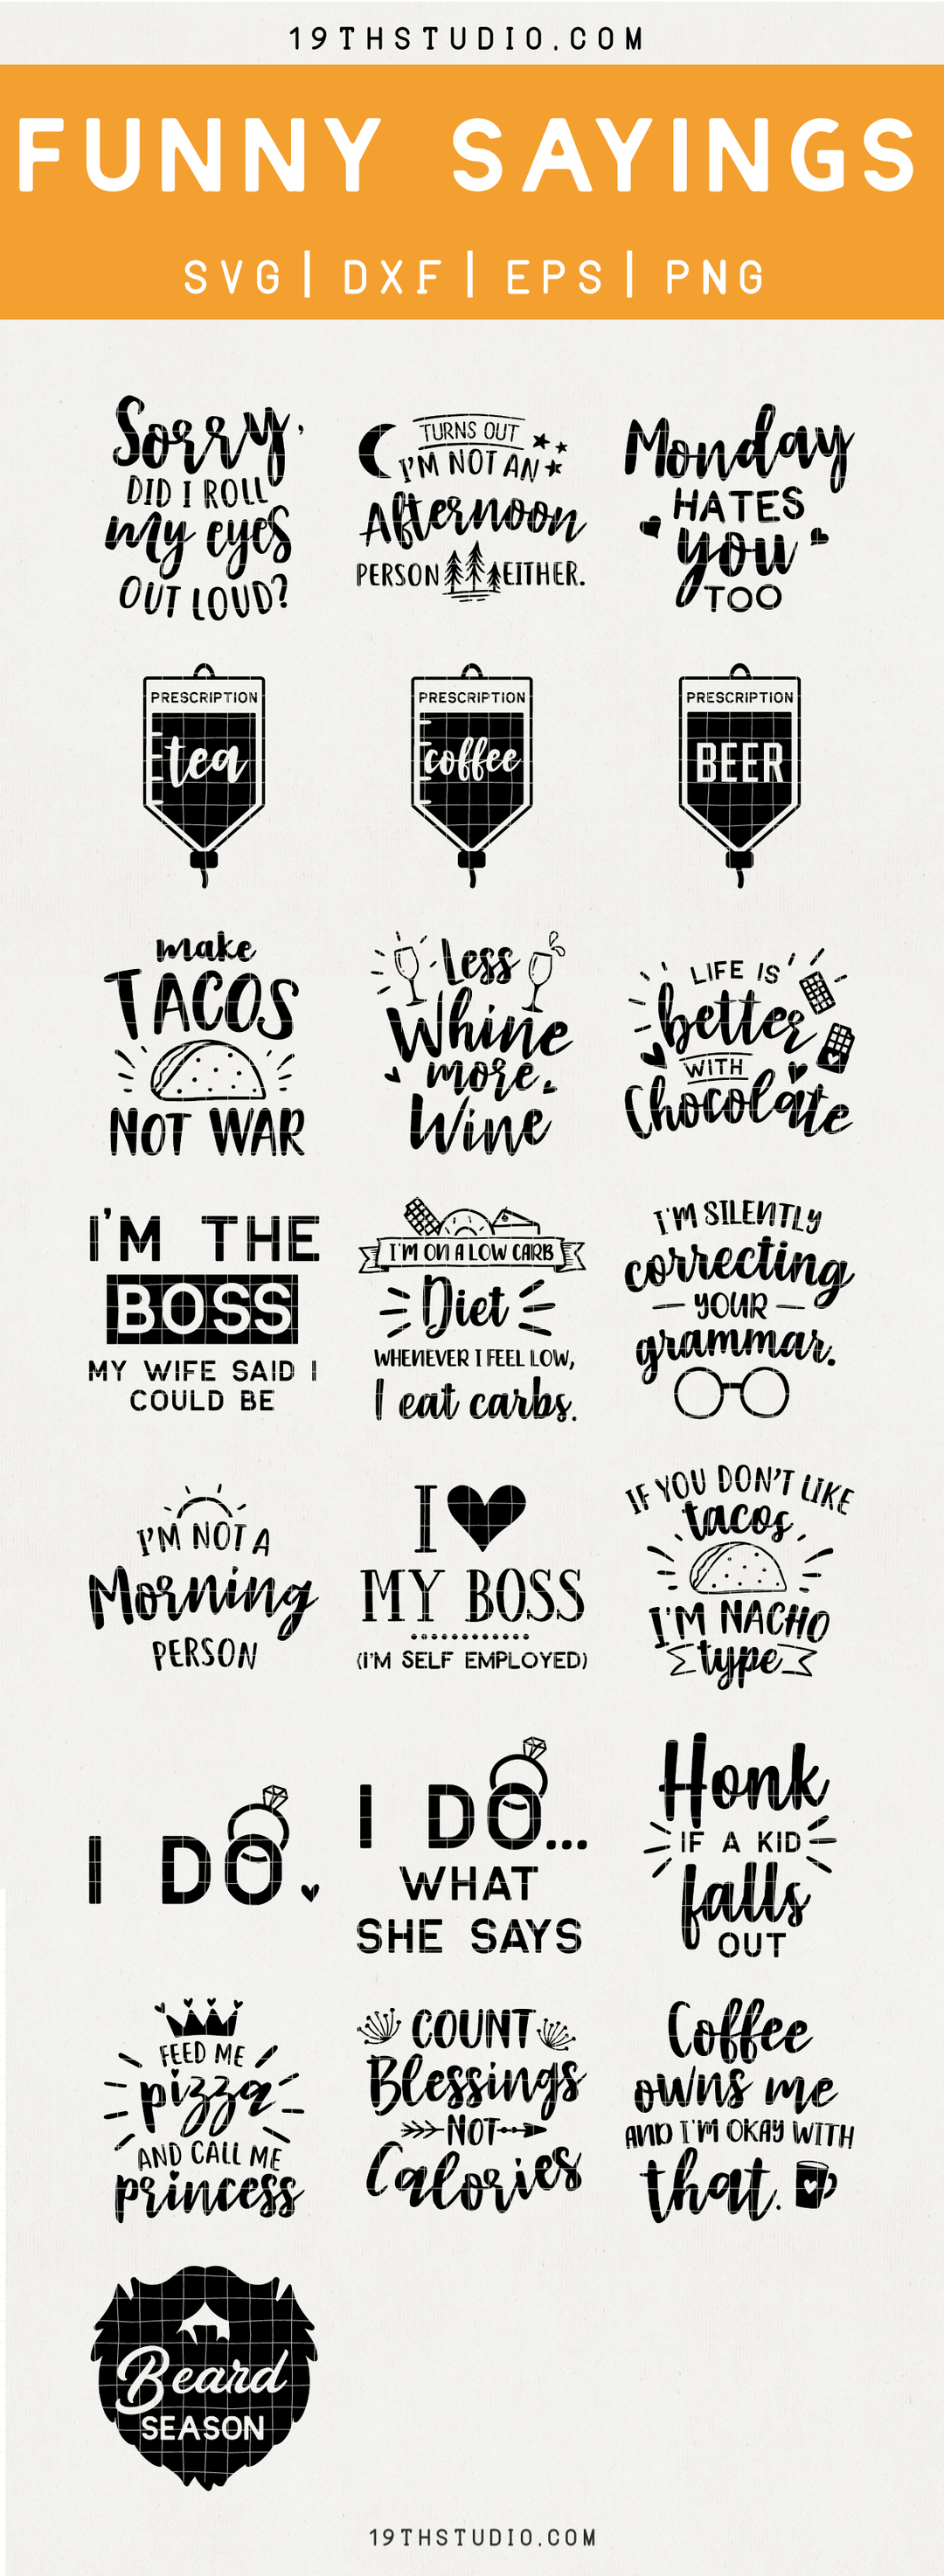 Funny quotes SVG bundle - M4 Craft House SVG - SVG files for Cricut and Silhouette